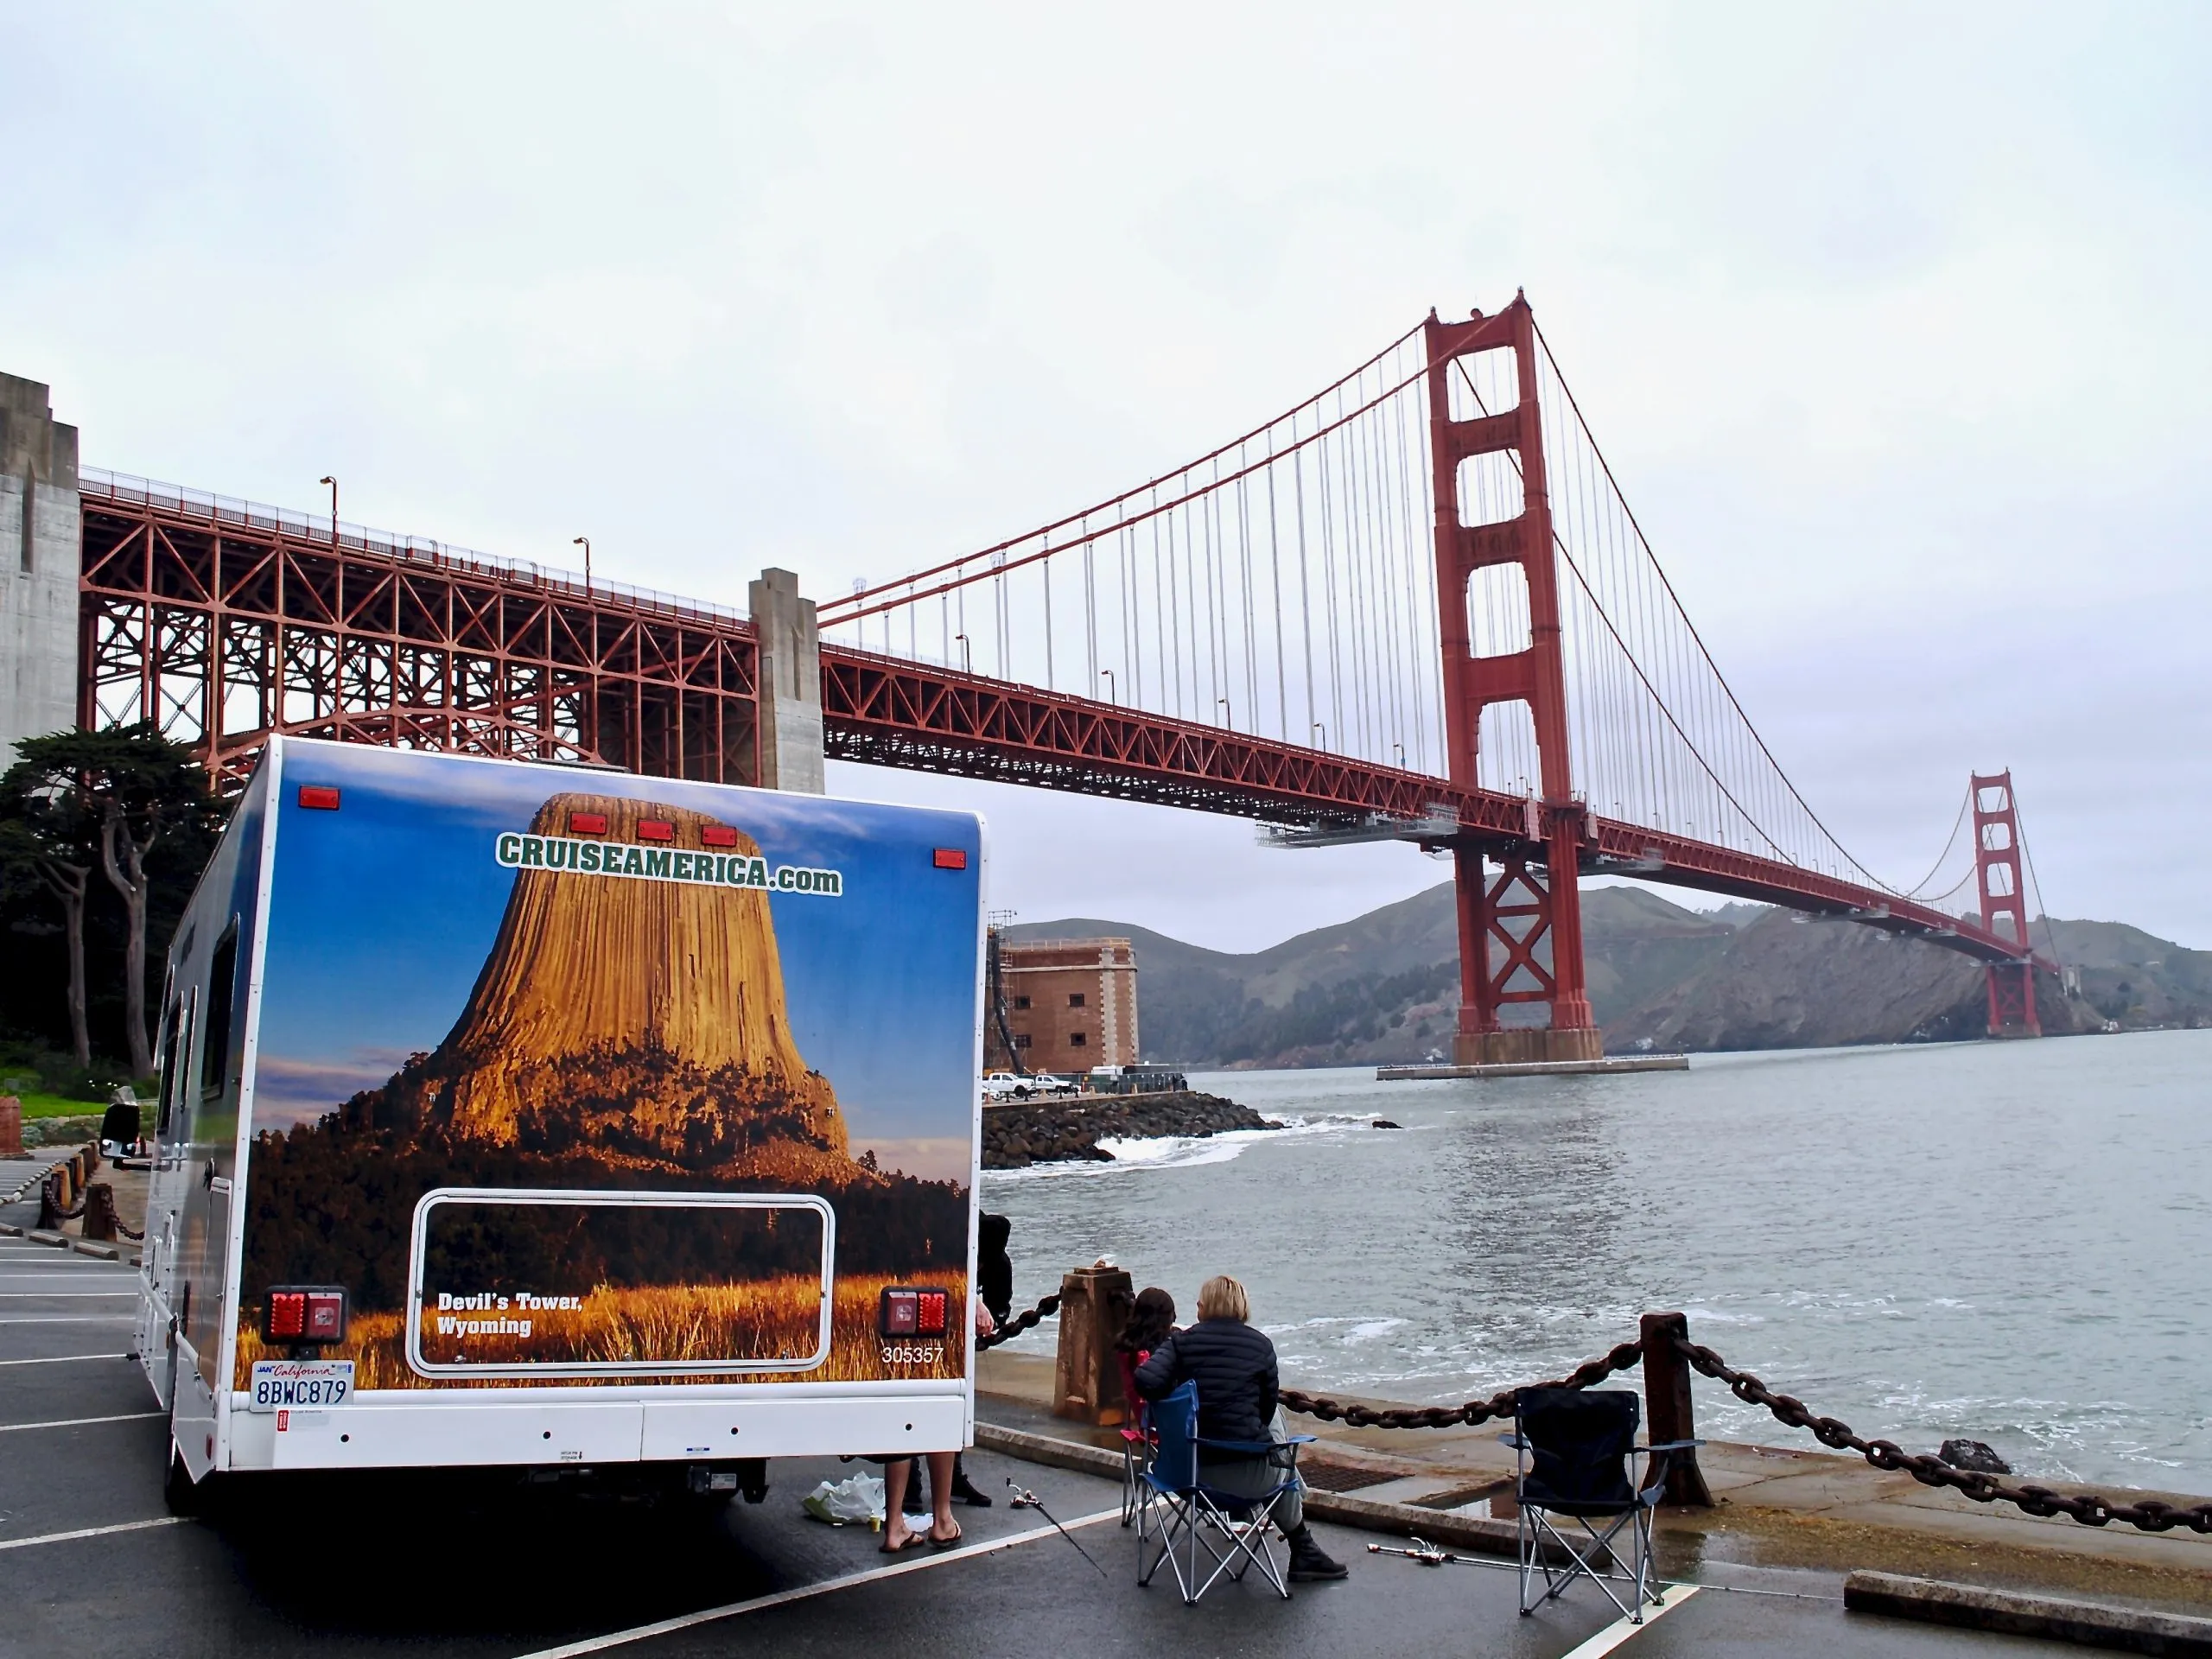 Rental motorhome parked with San Francisco bridge in the background